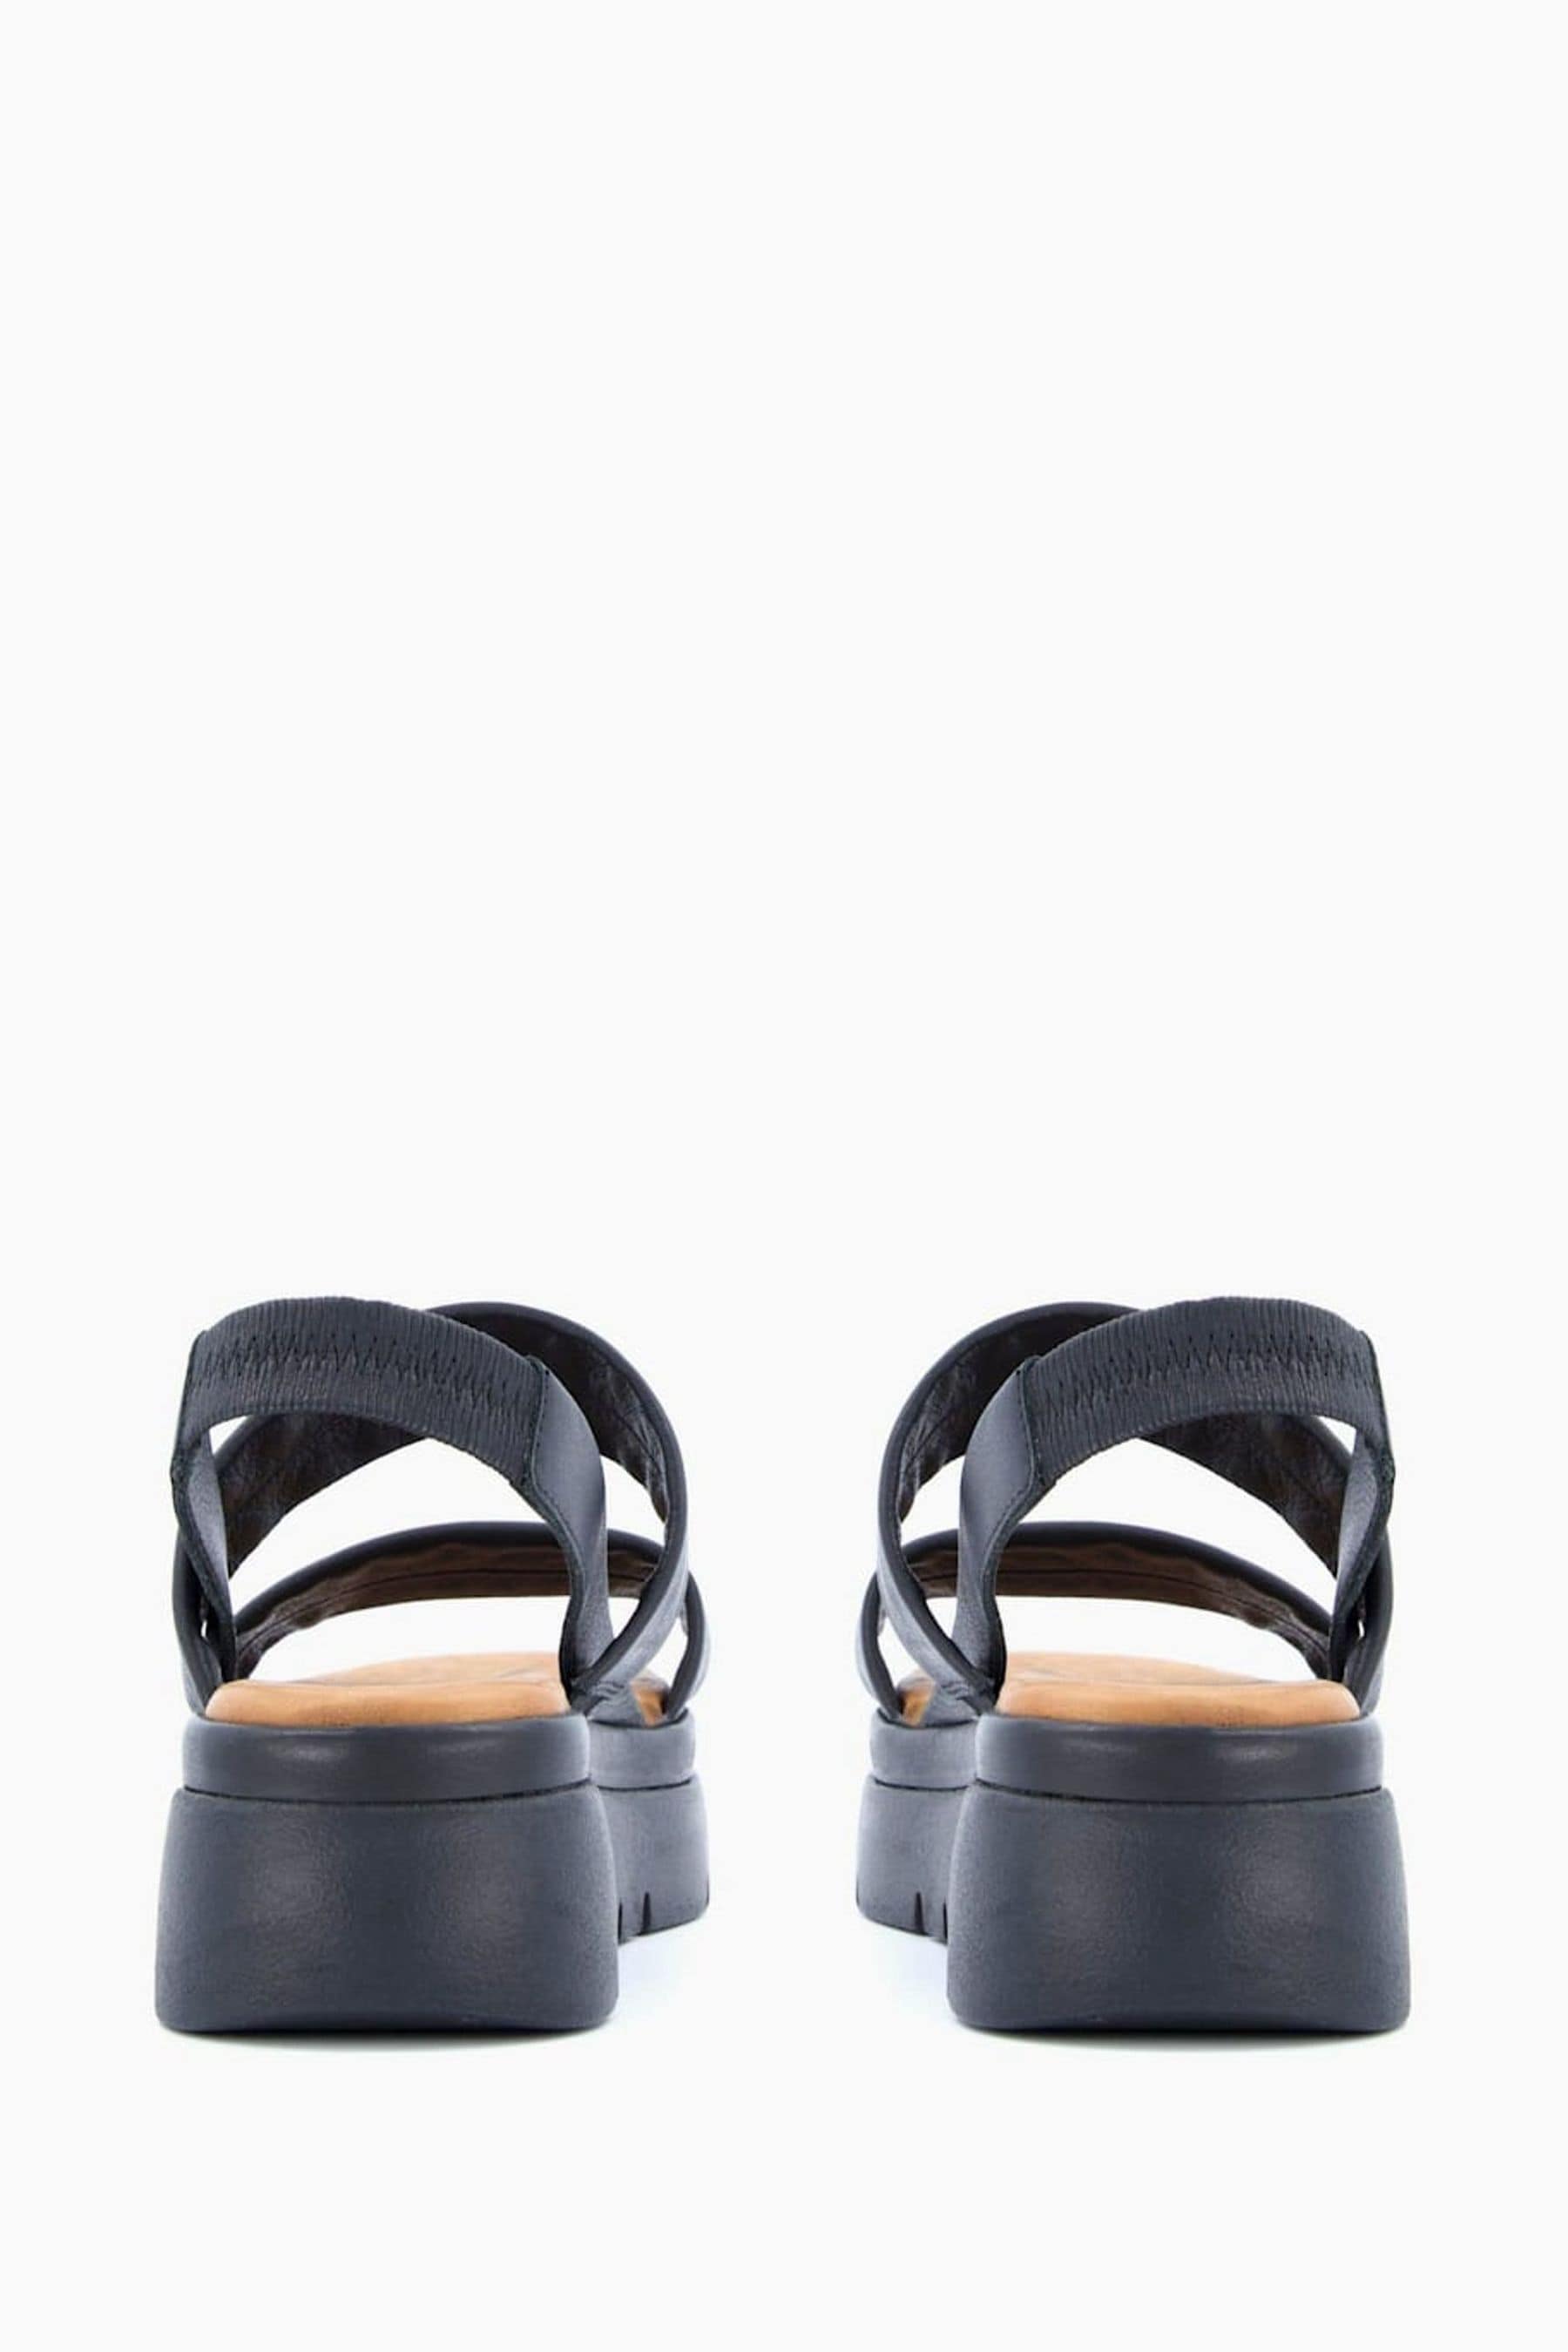 Buy Dune London Location Padded Flatform Sandals from the Next UK ...